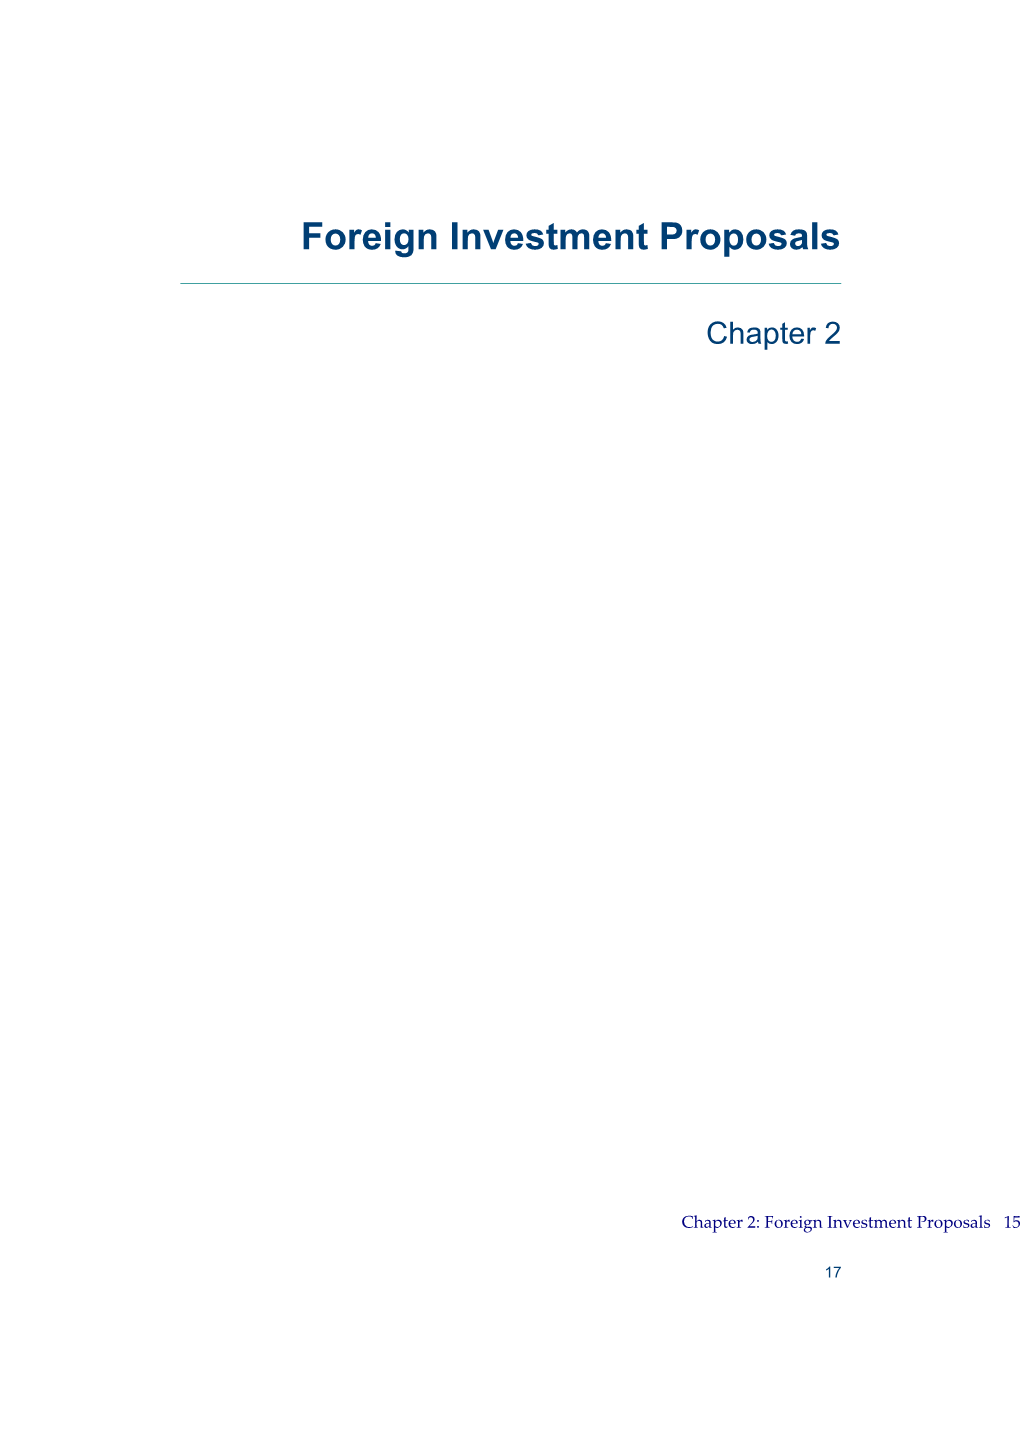 Foreign Investment Review Board Annual Report 2014-15